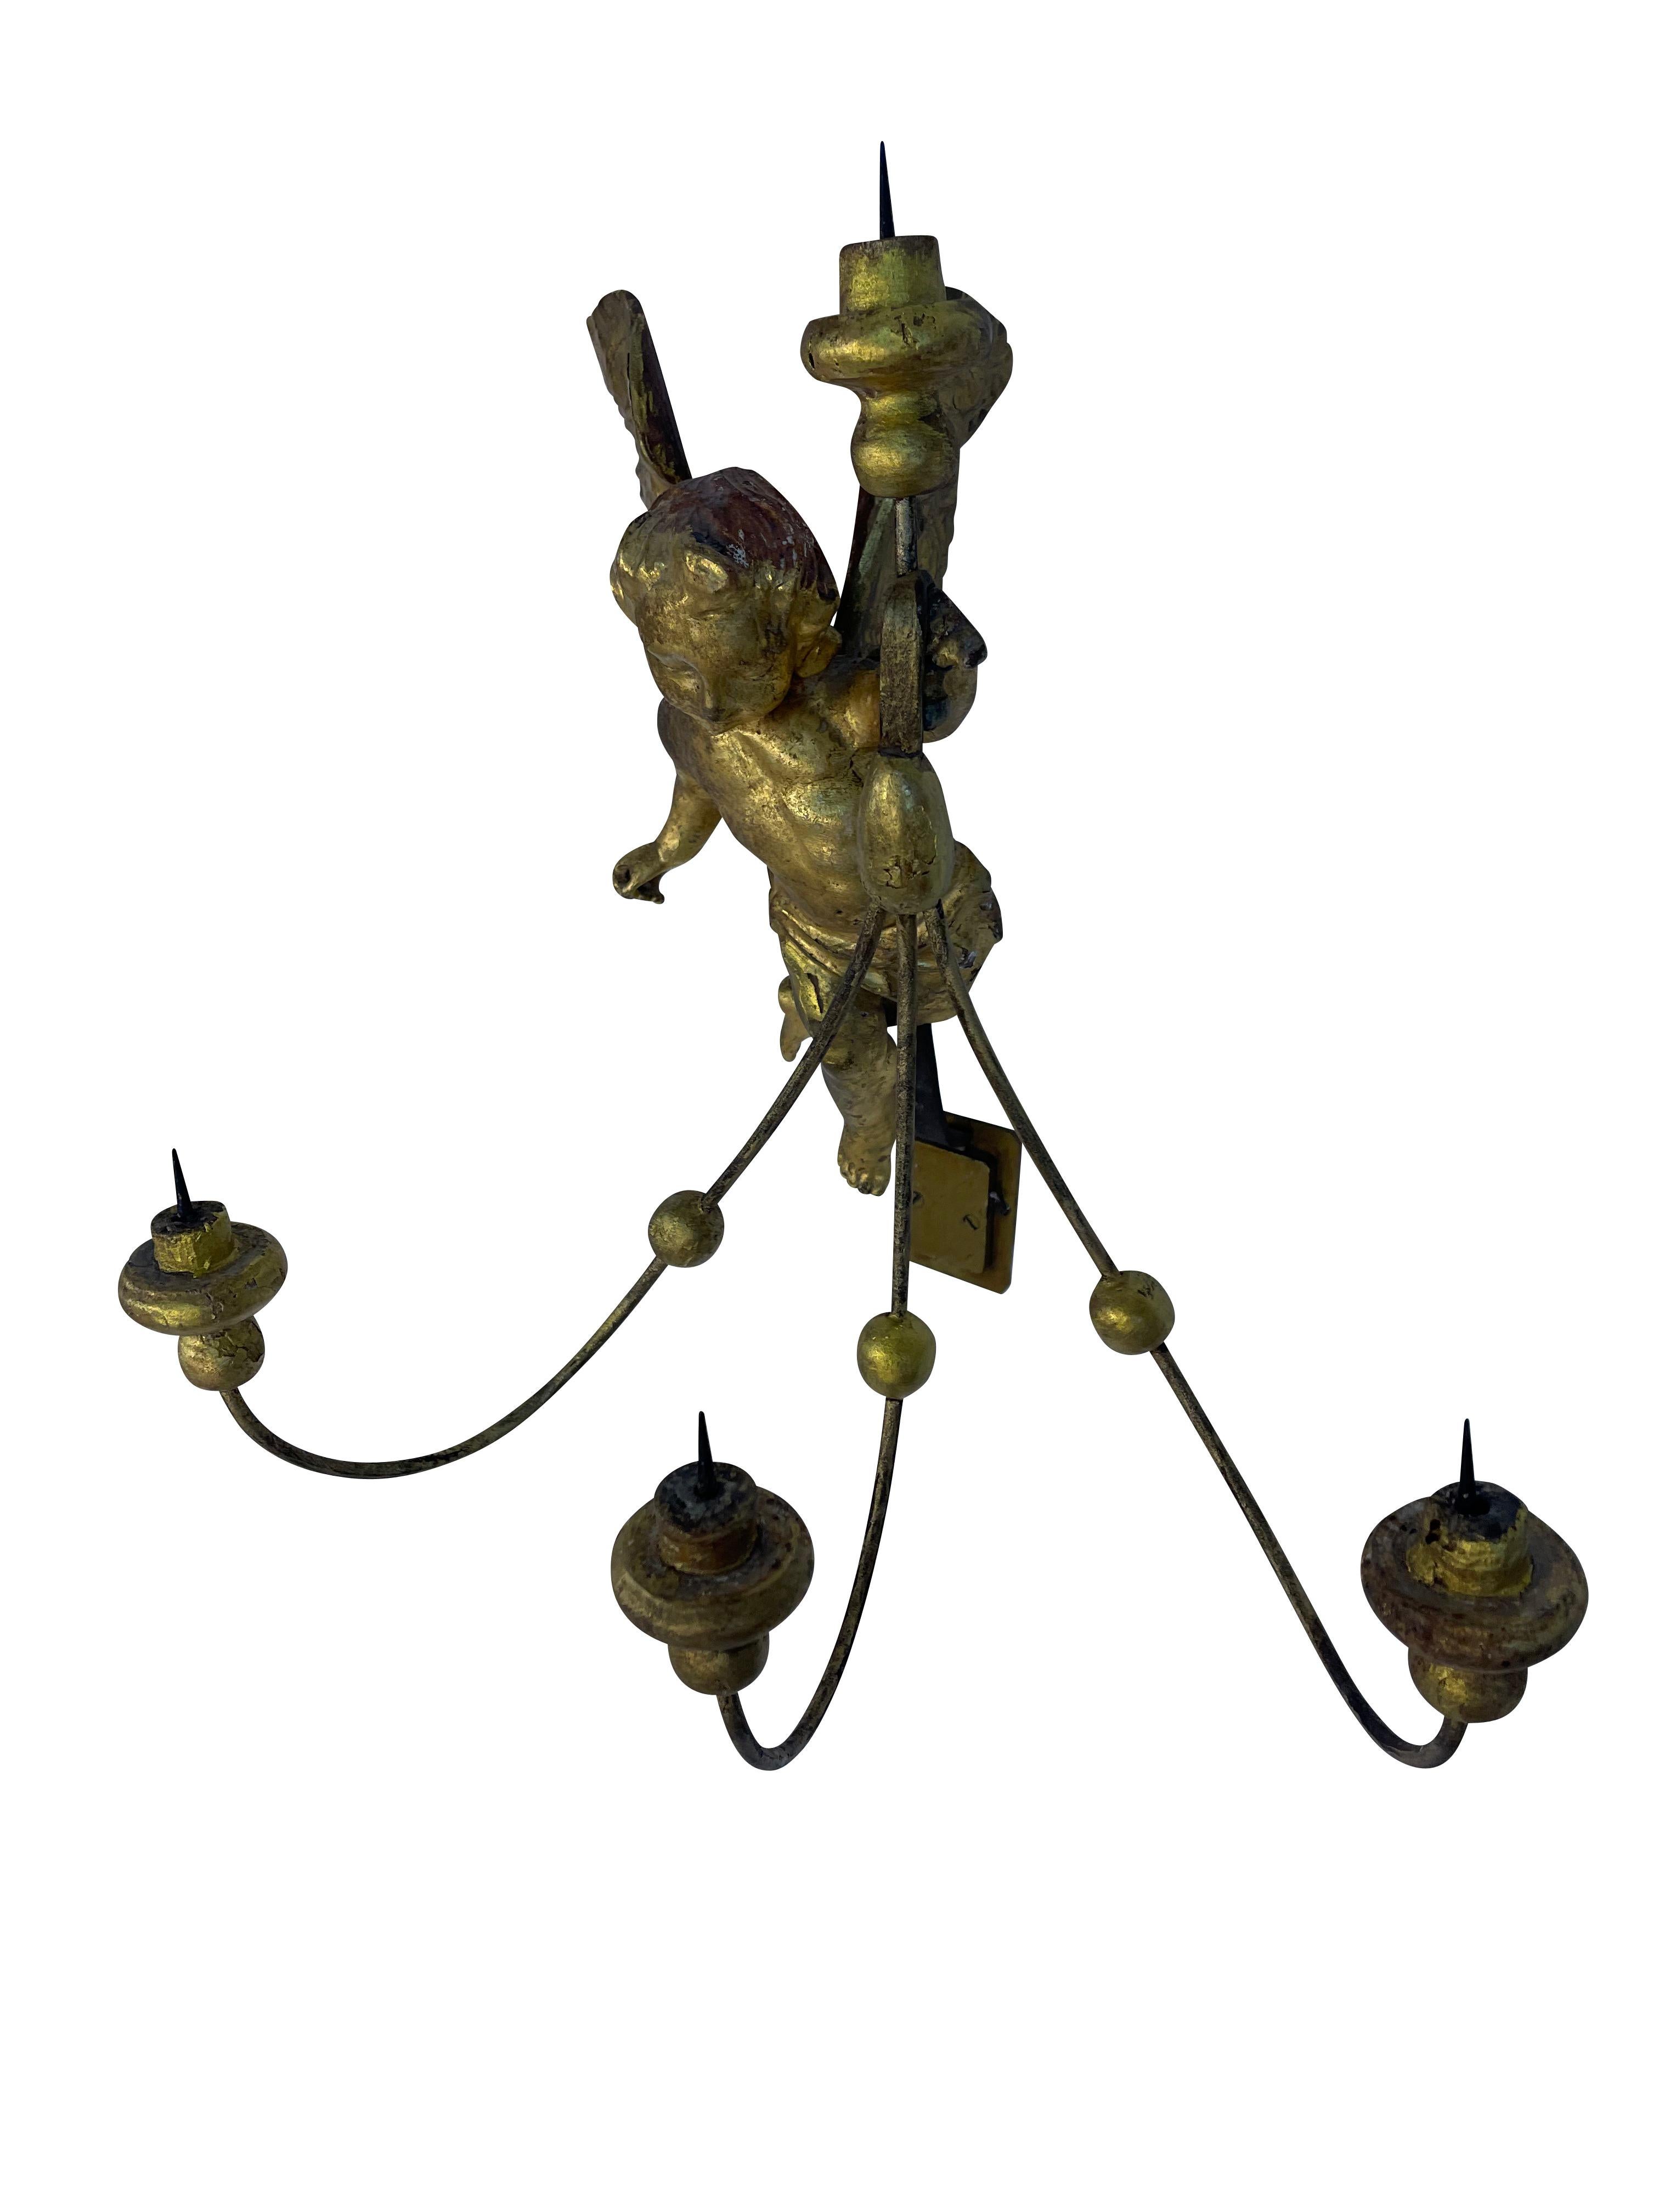 Pair of unusual 19th-century Italian gilt putti four-arm candle sconces.  These hand-crafted gilt winged putti /angels are a charming addition to any room. They are incredibly well-made with their own brass mounting plates.  There are three curved